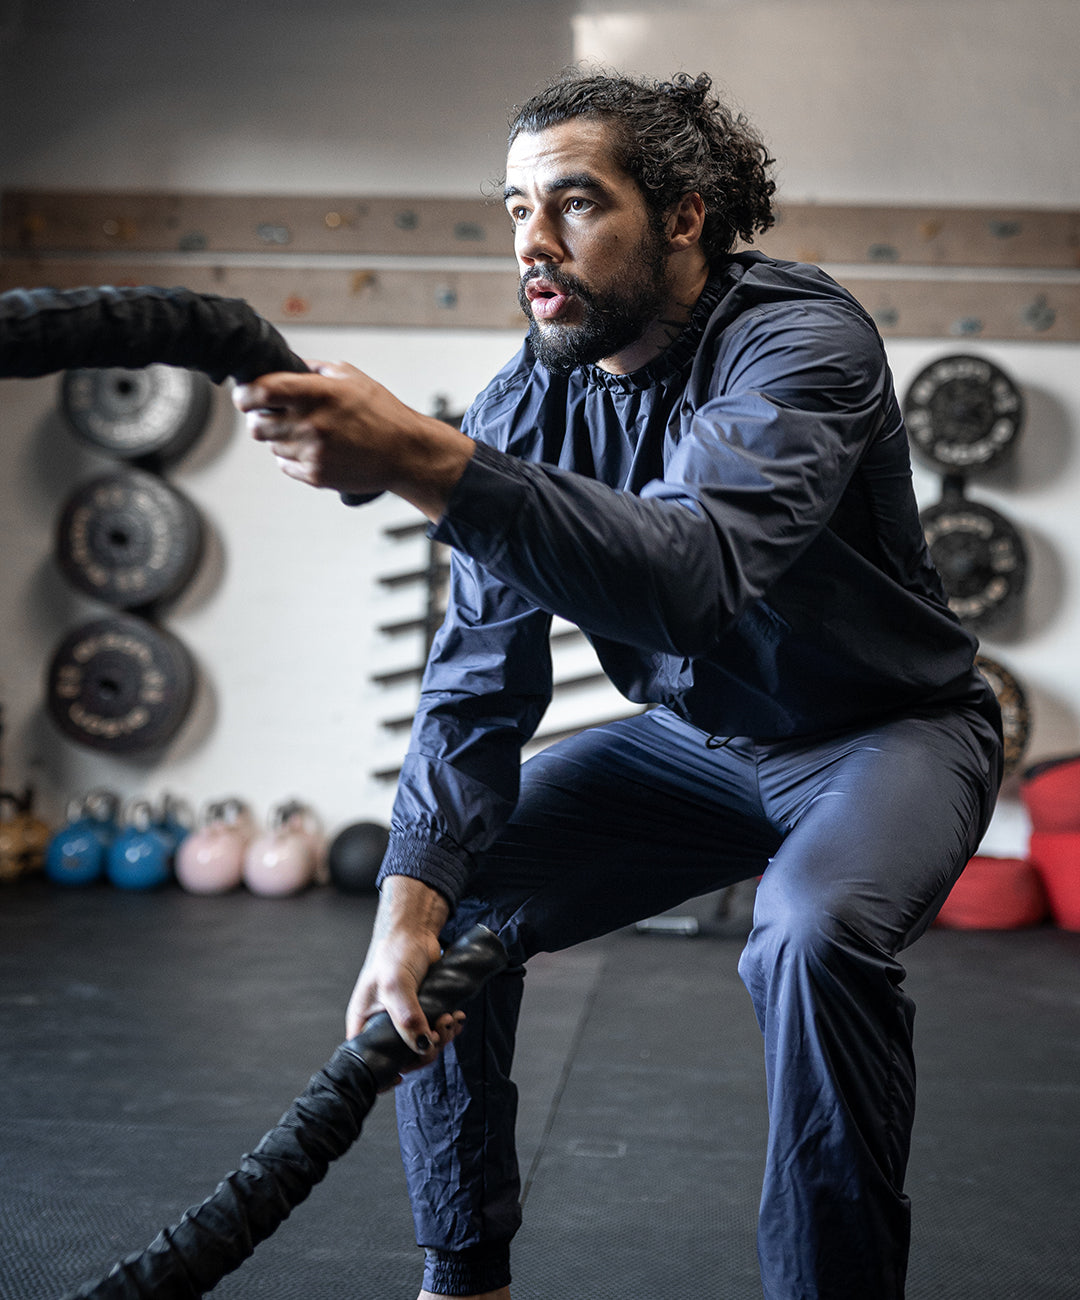 How Effective Is Boxing Training for Weight Loss?